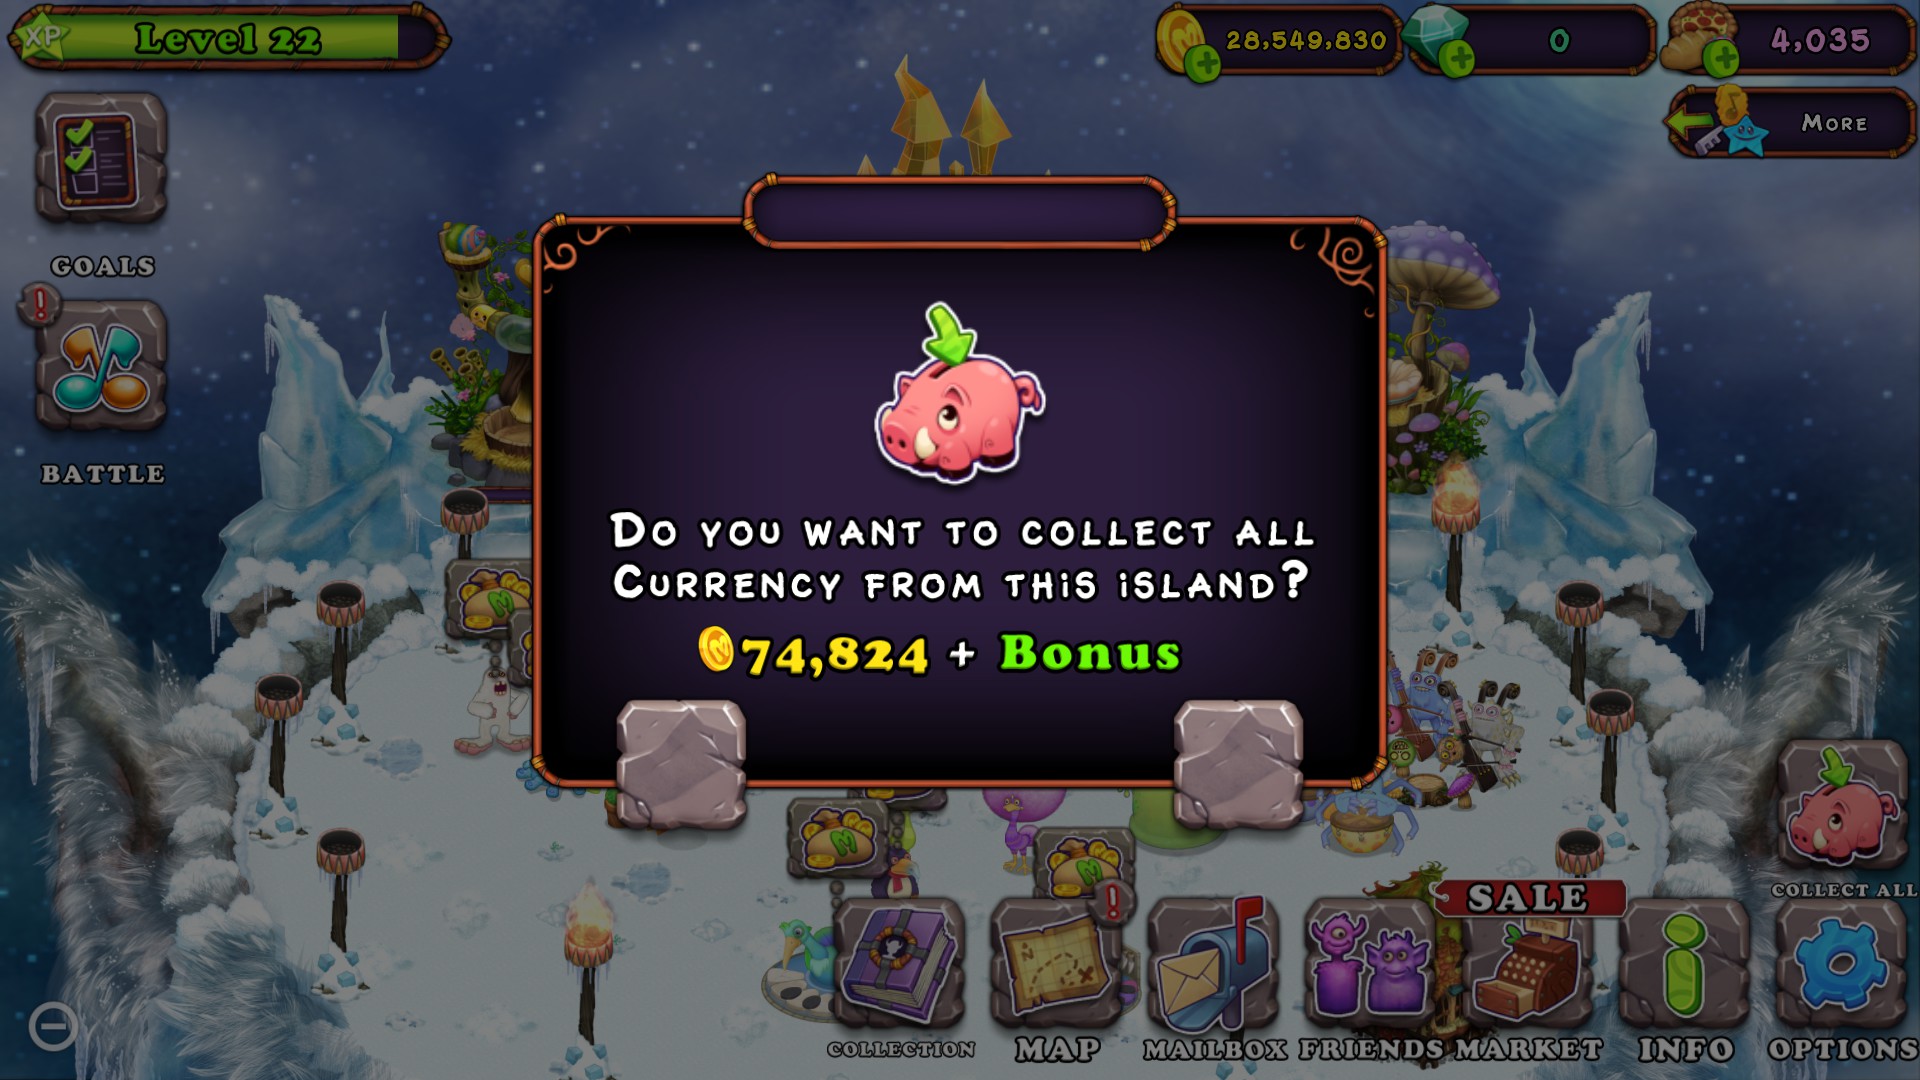 My Singing Monsters (Steam) - The Cutting Room Floor